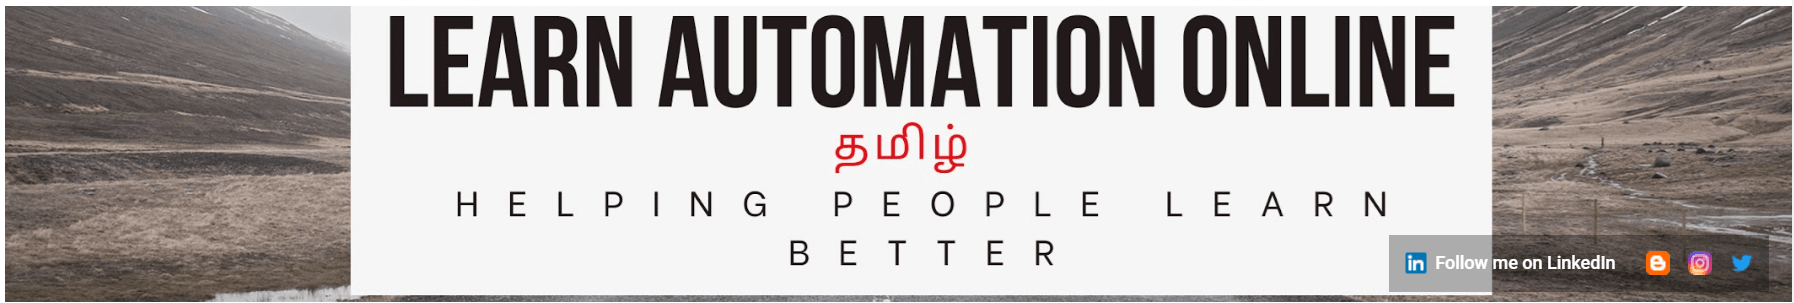 Learn Automation Online